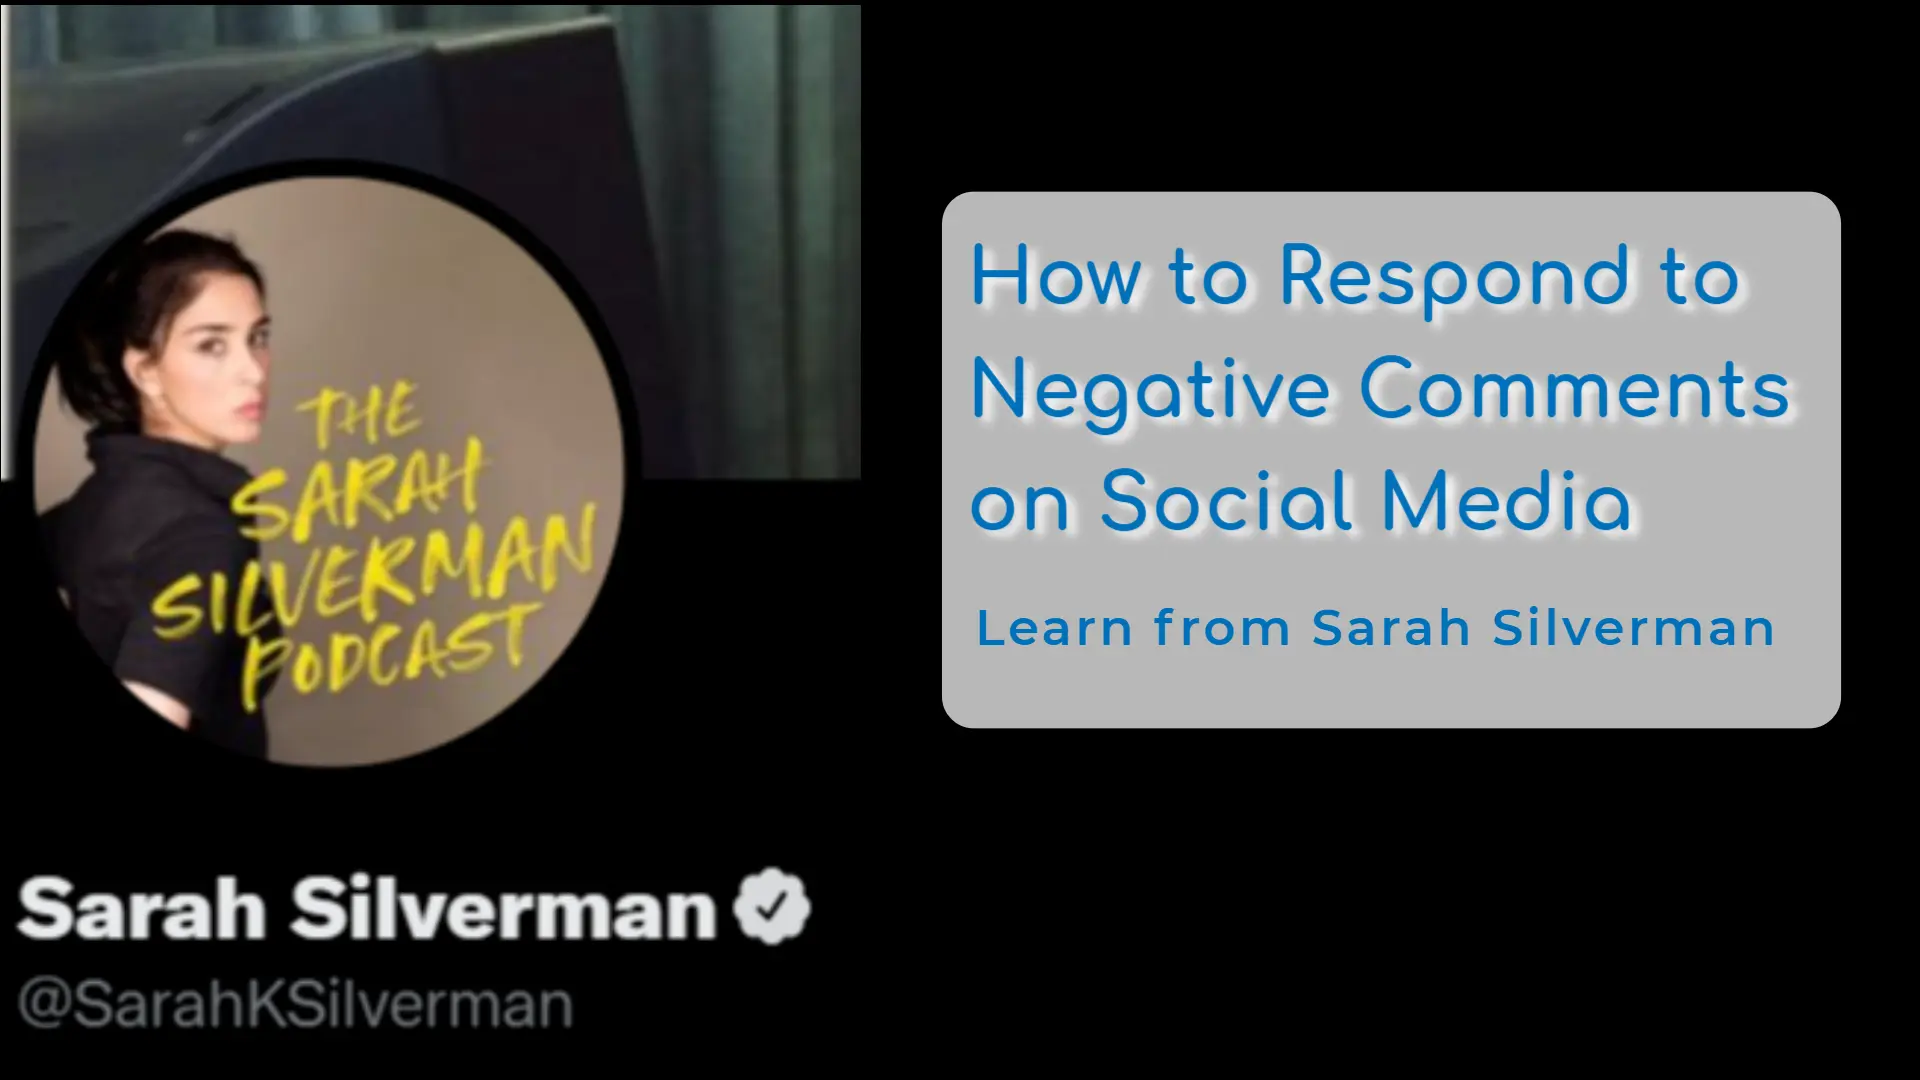 how to respond to negative comments on social media